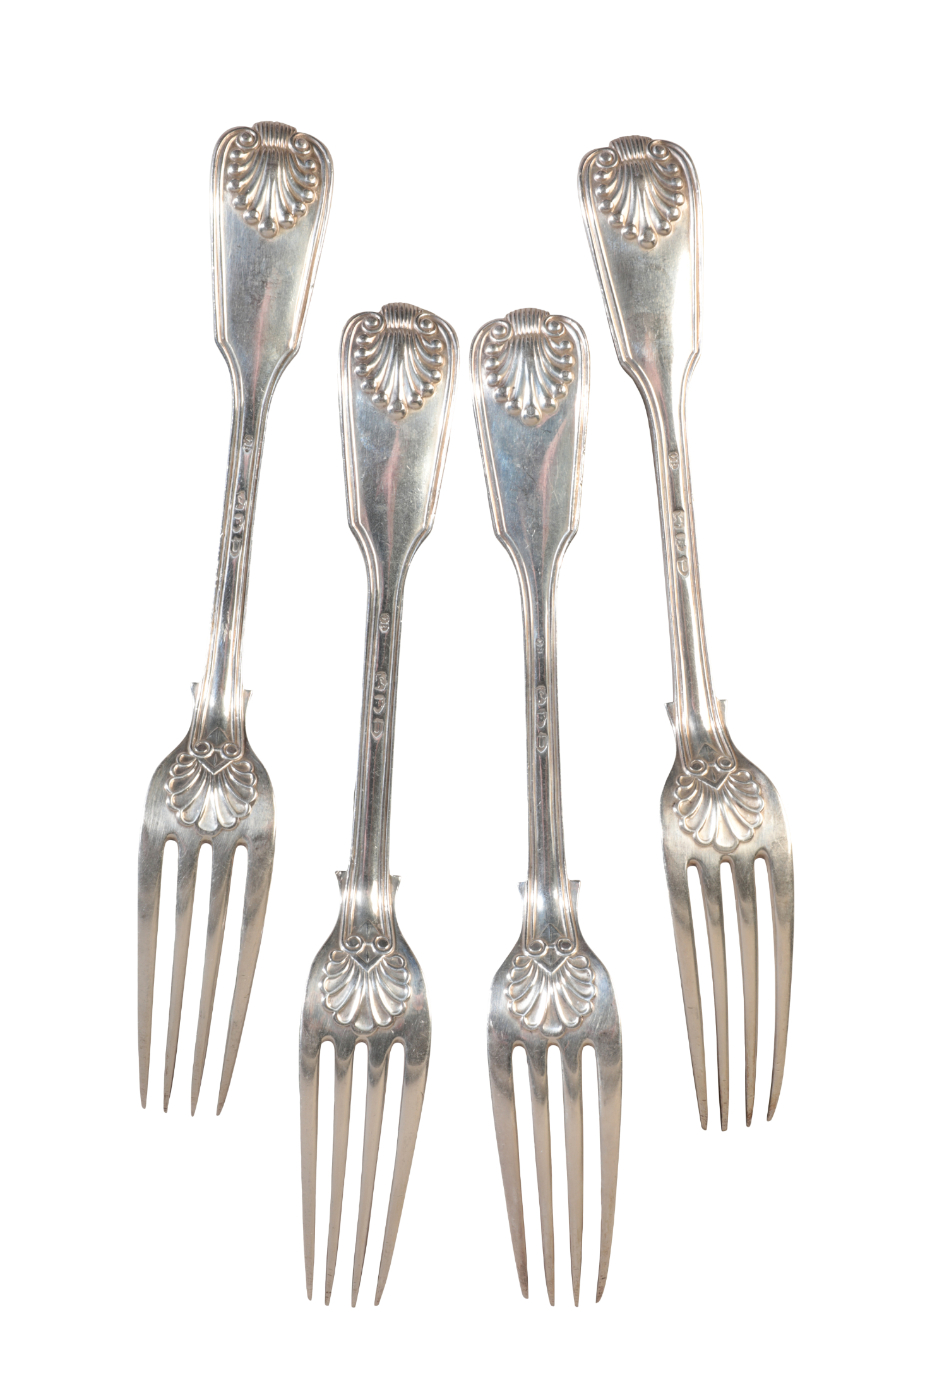 A GEORGE V SILVER HOURGLASS PATTERN CUTLERY SERVICE - Image 2 of 2